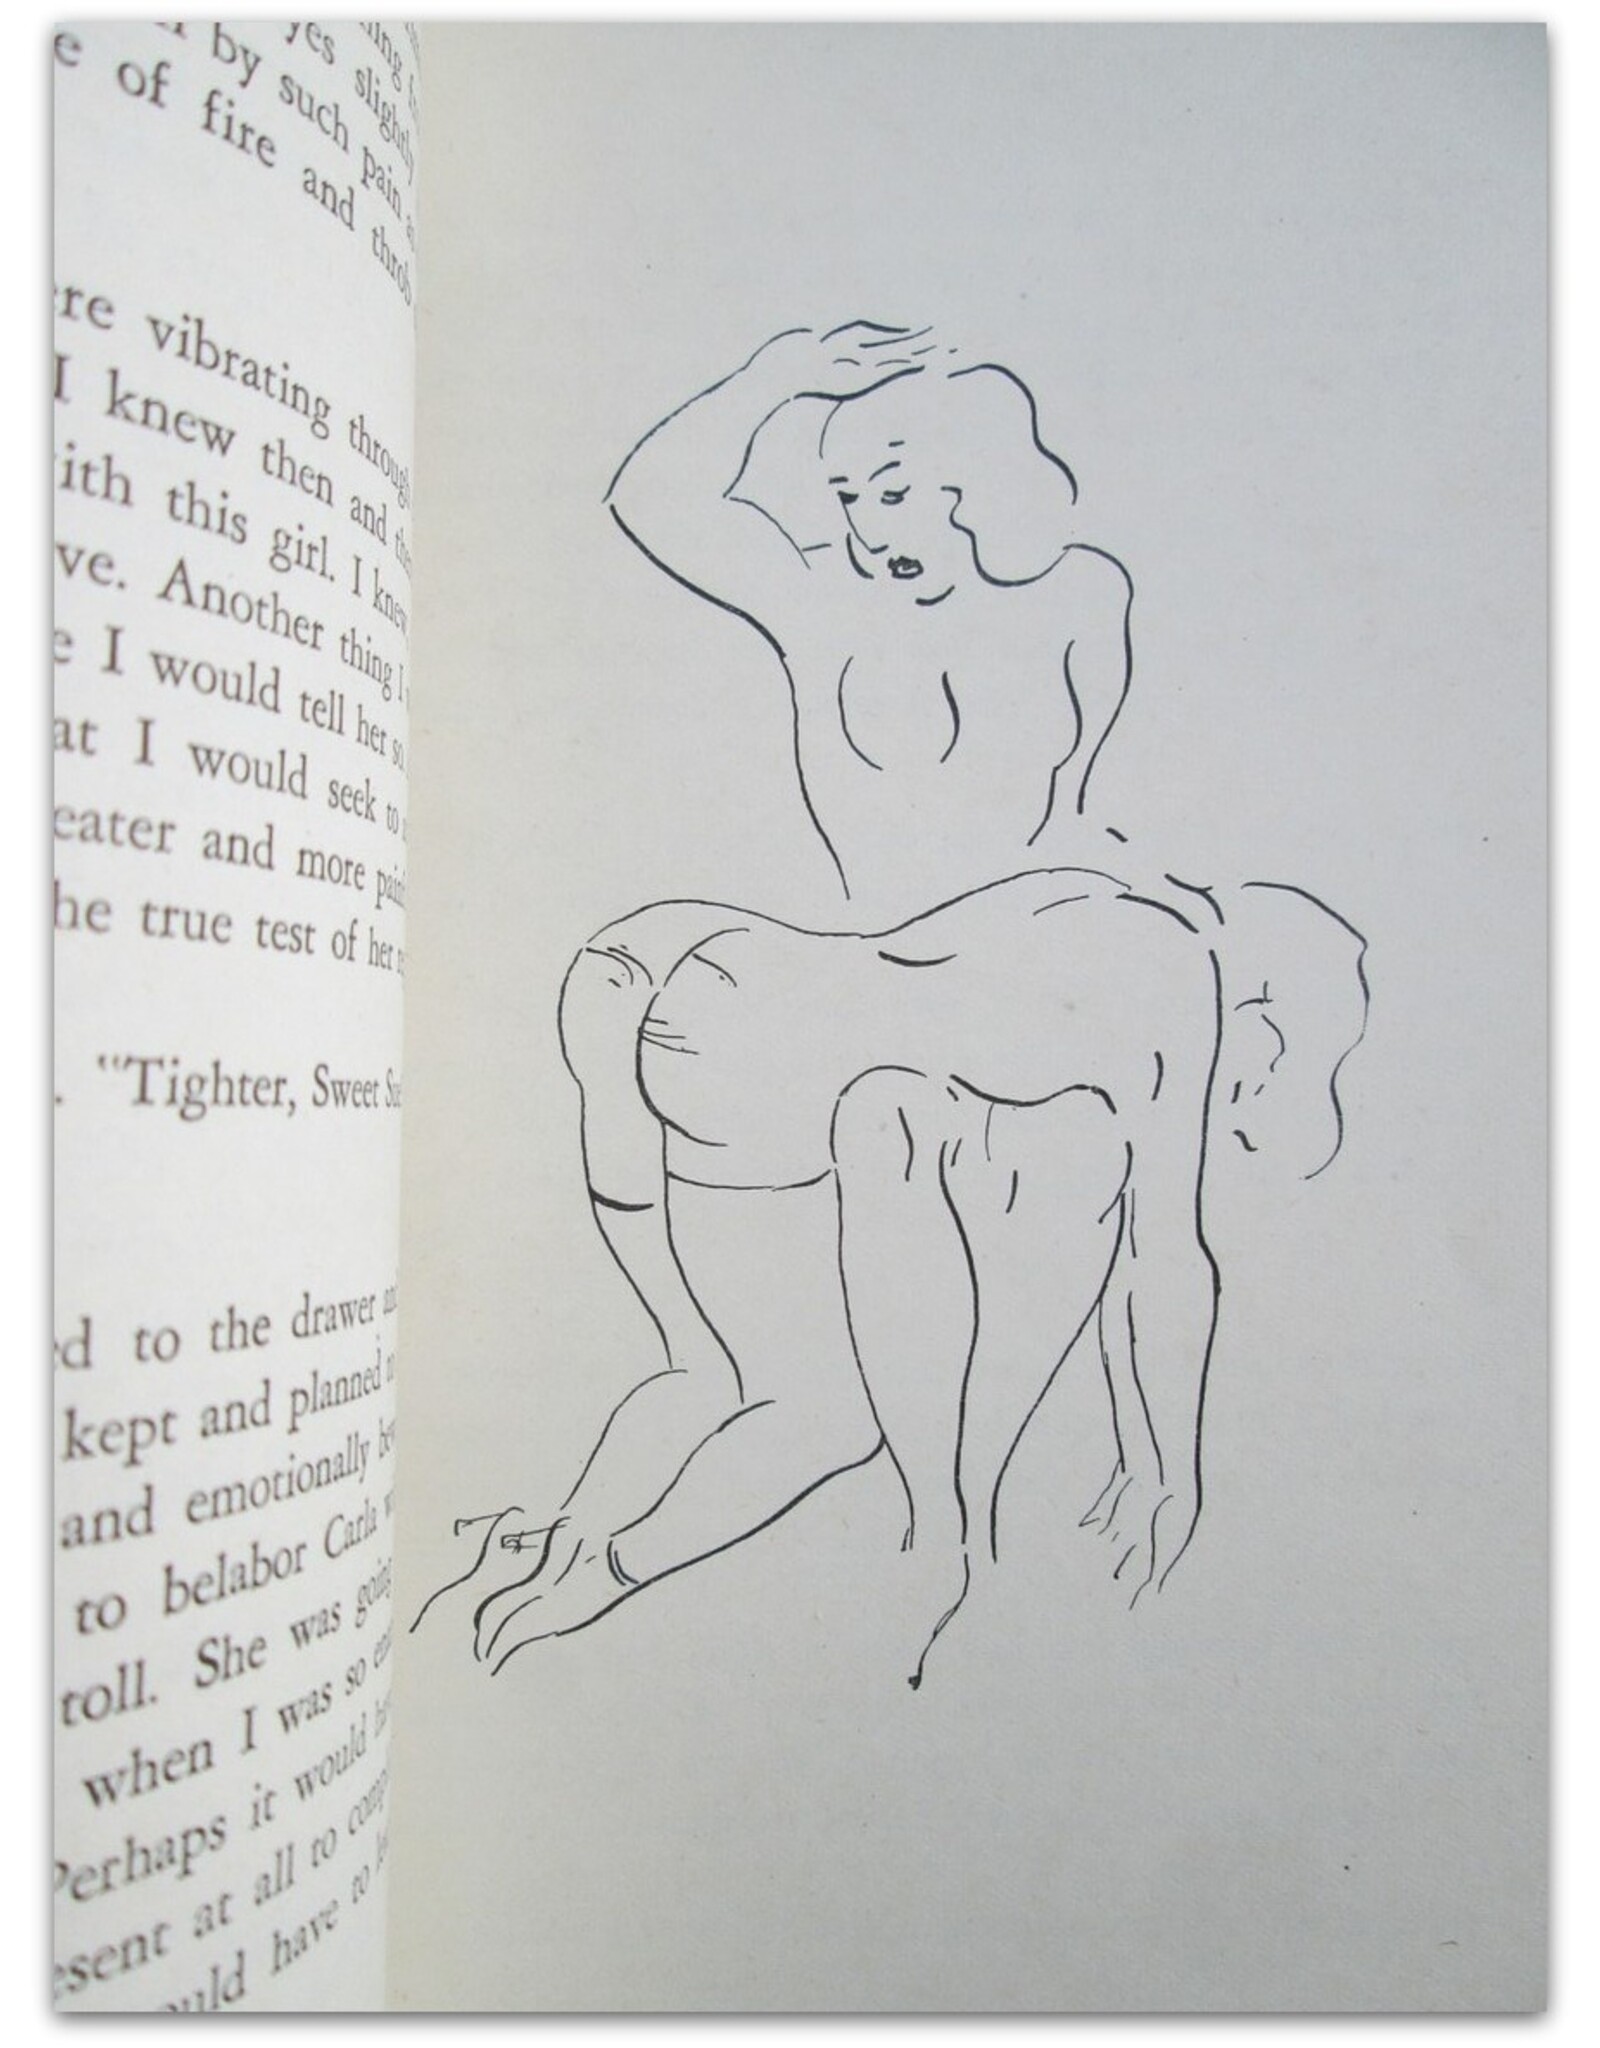 Lesbos - Slap Harder Sweet Sue. Translated from the French. [...] 10 Illustrations.